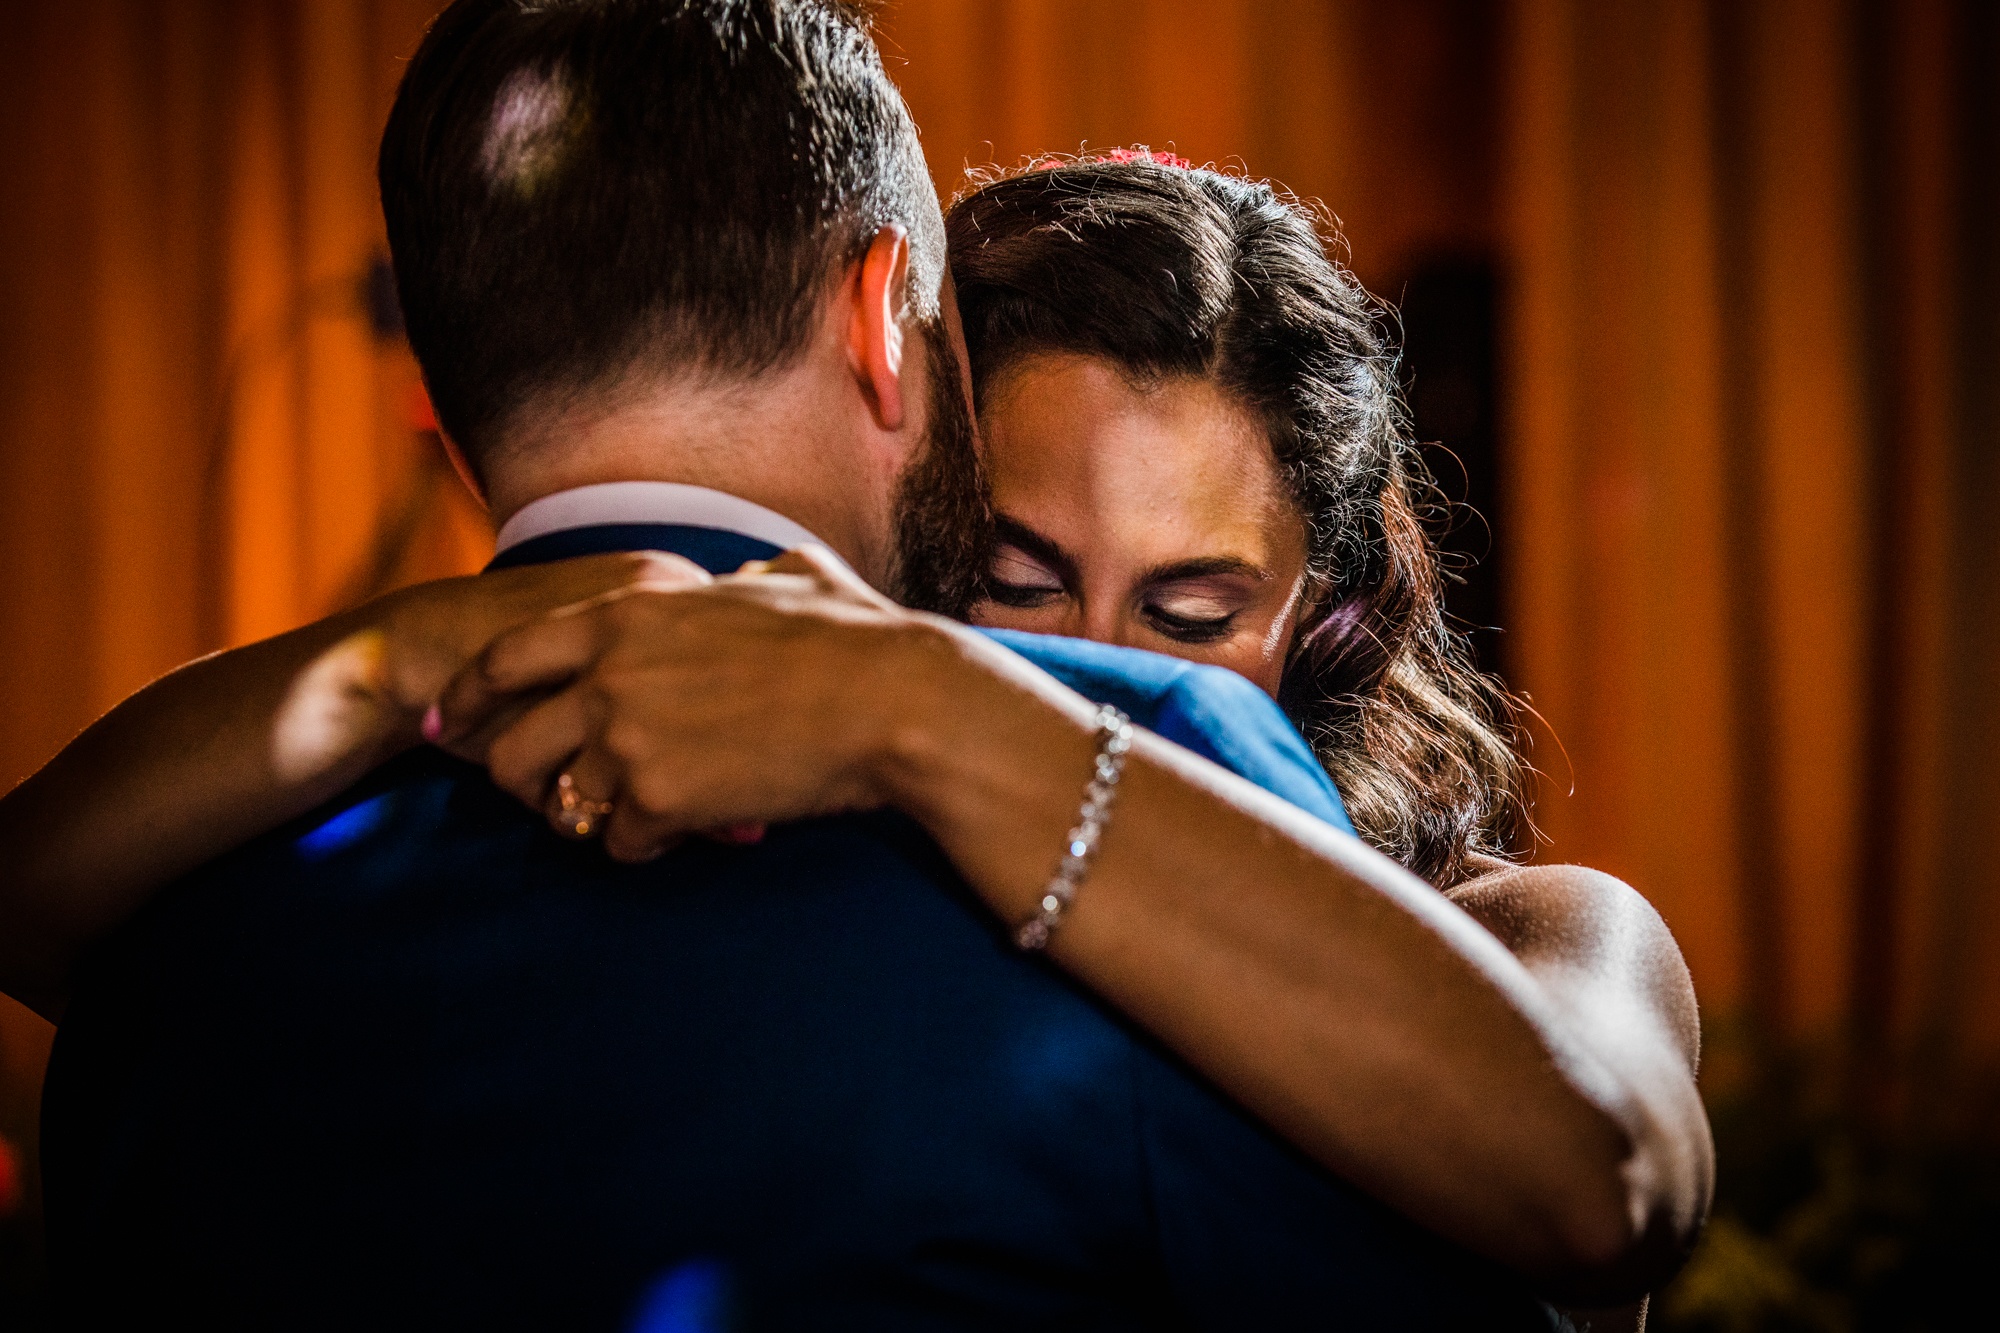 A couple shares their first dance during a Hideout Chicago wedding reception